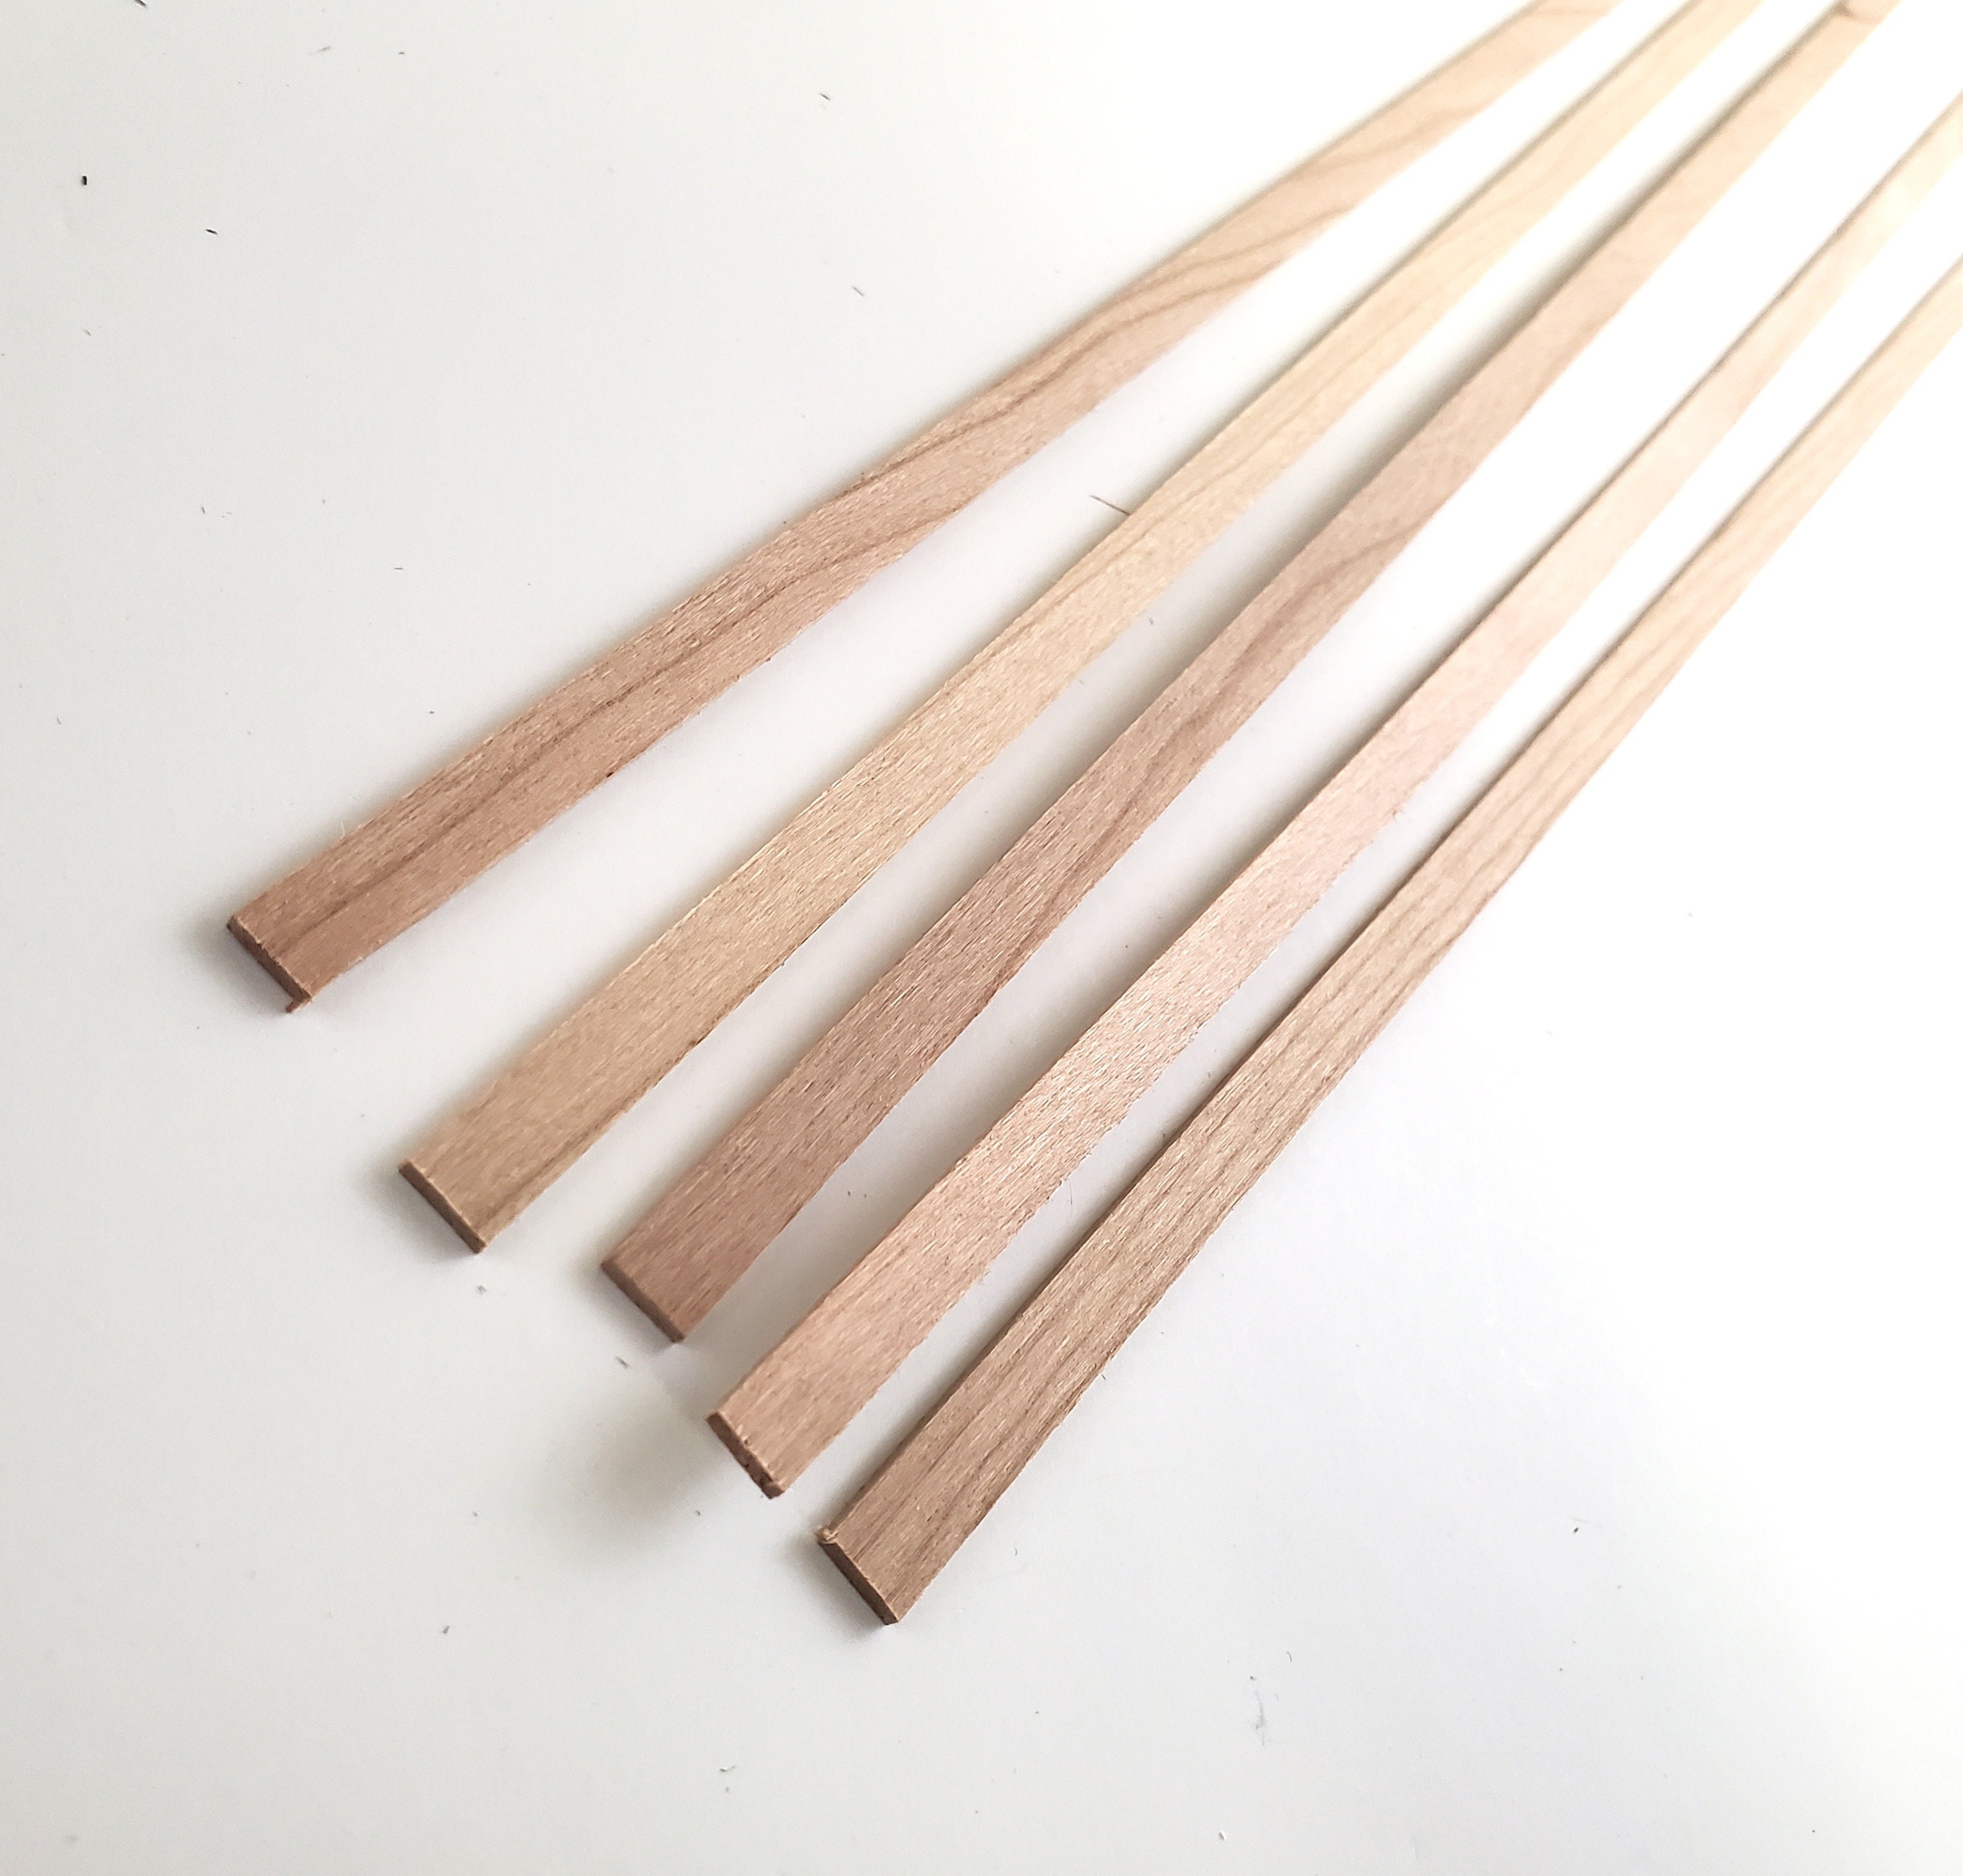 Natural Bamboo Thin Wood Strips, 10pcs Bamboo Plank Craft Material for DIY  Building Furniture Lantern Ornaments, Making House Plain Model 